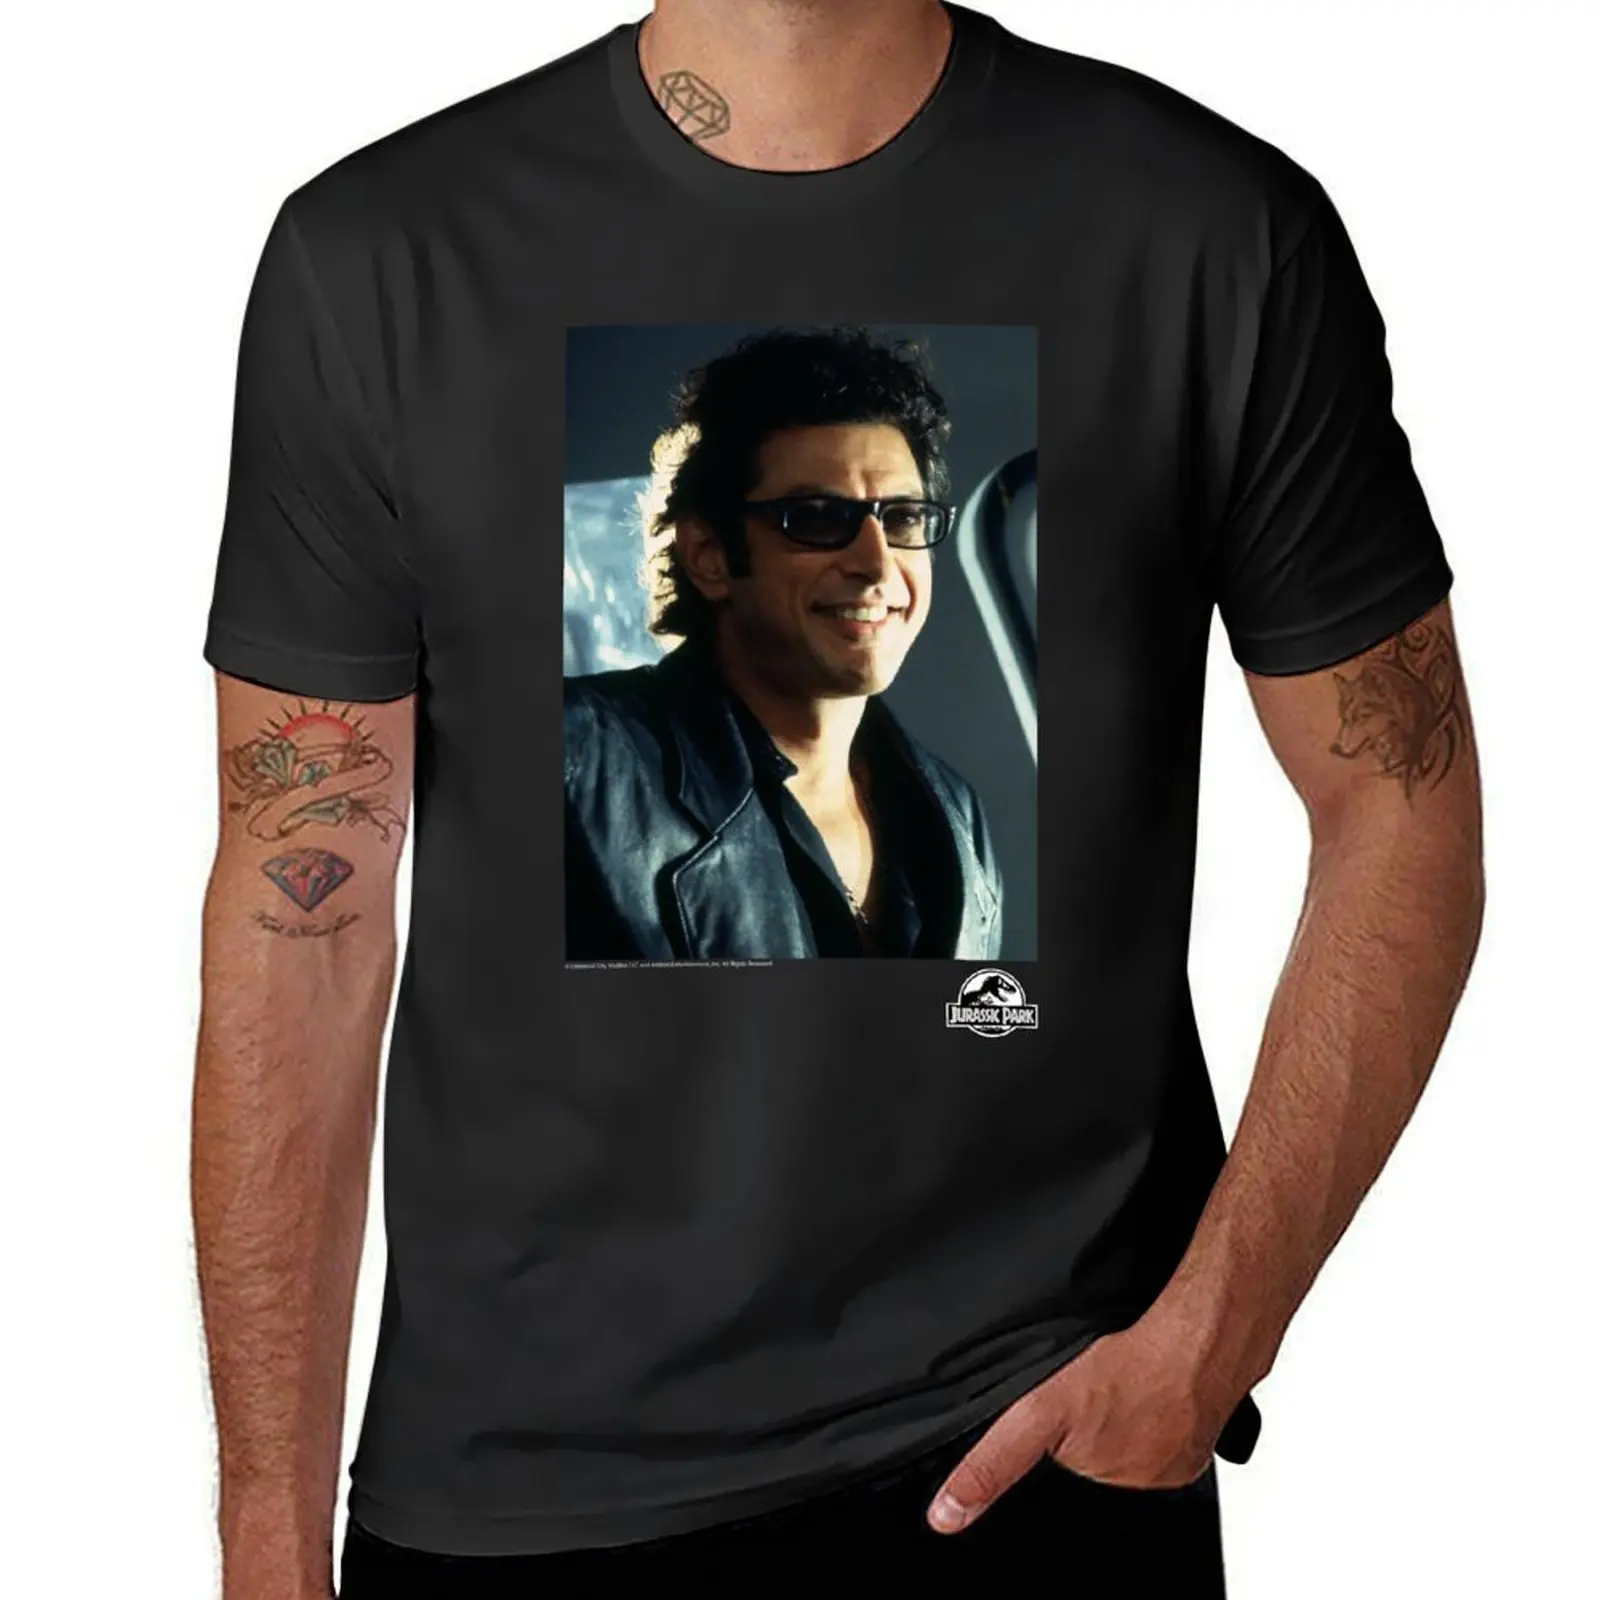 Jurassic Park Dr Ian Malcolm Sexy Chaos Theorist Poster T shirt oversized cute tops blanks oversizeds